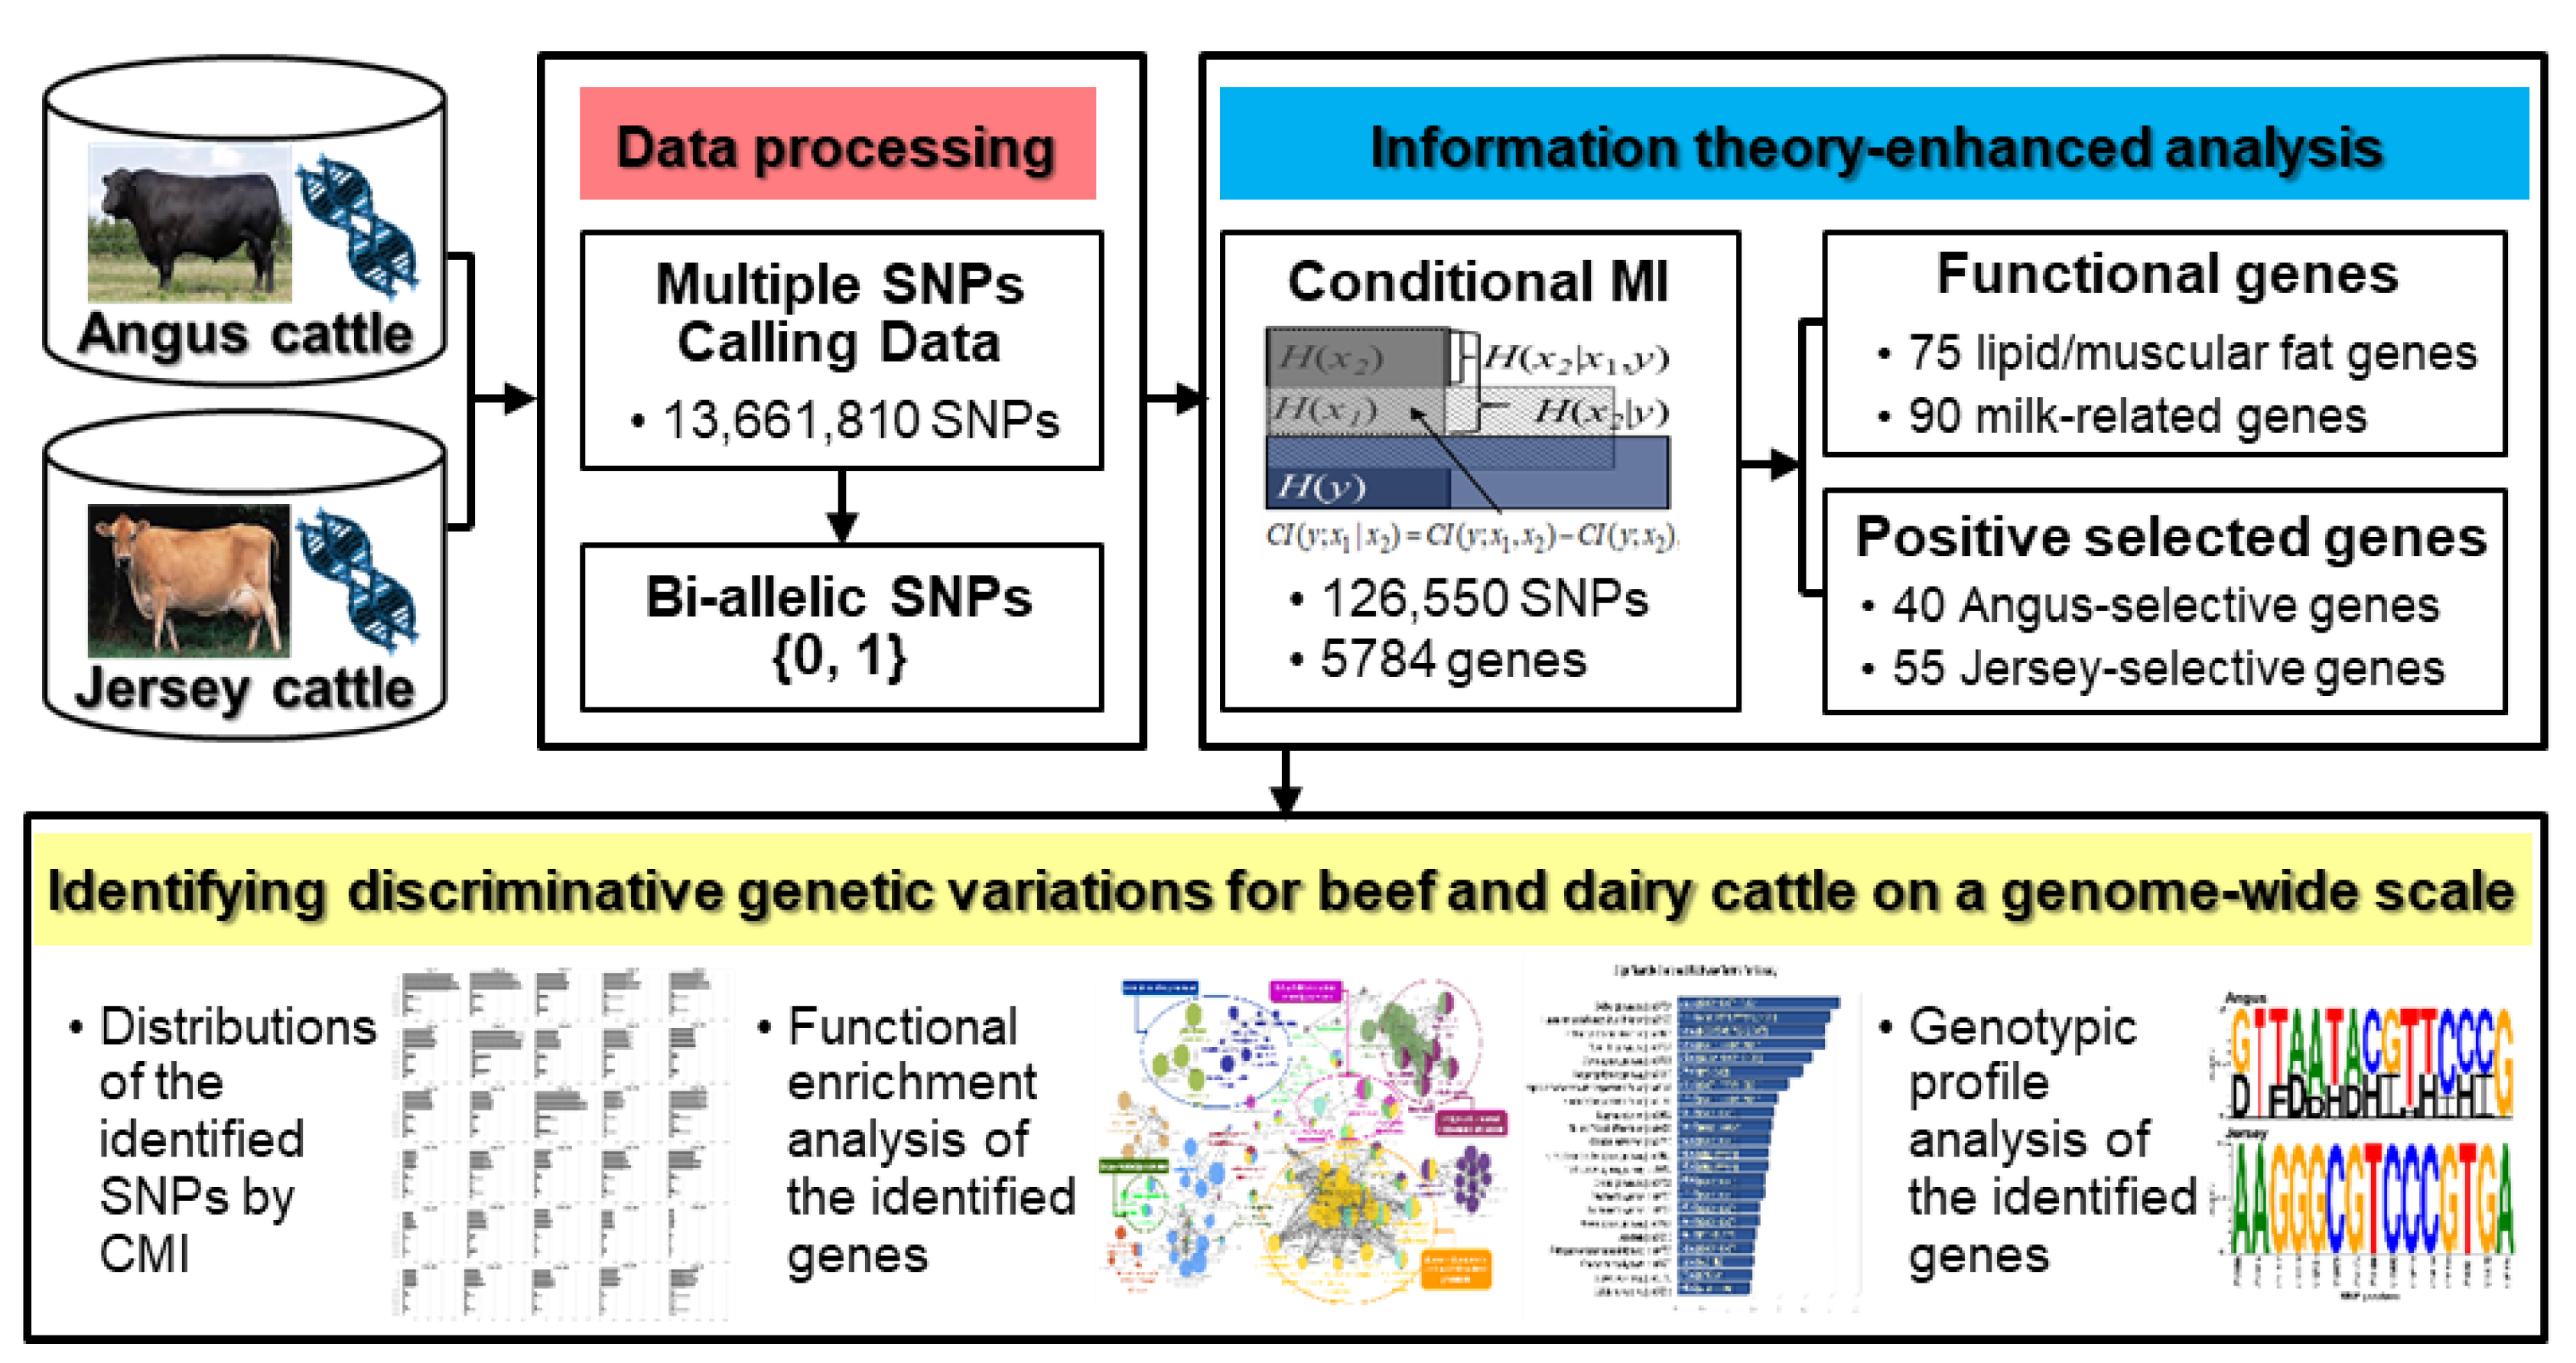 Genes | Free Full-Text | Genome-Wide Identification of Discriminative  Genetic Variations in Beef and Dairy Cattle via an Information-Theoretic  Approach | HTML